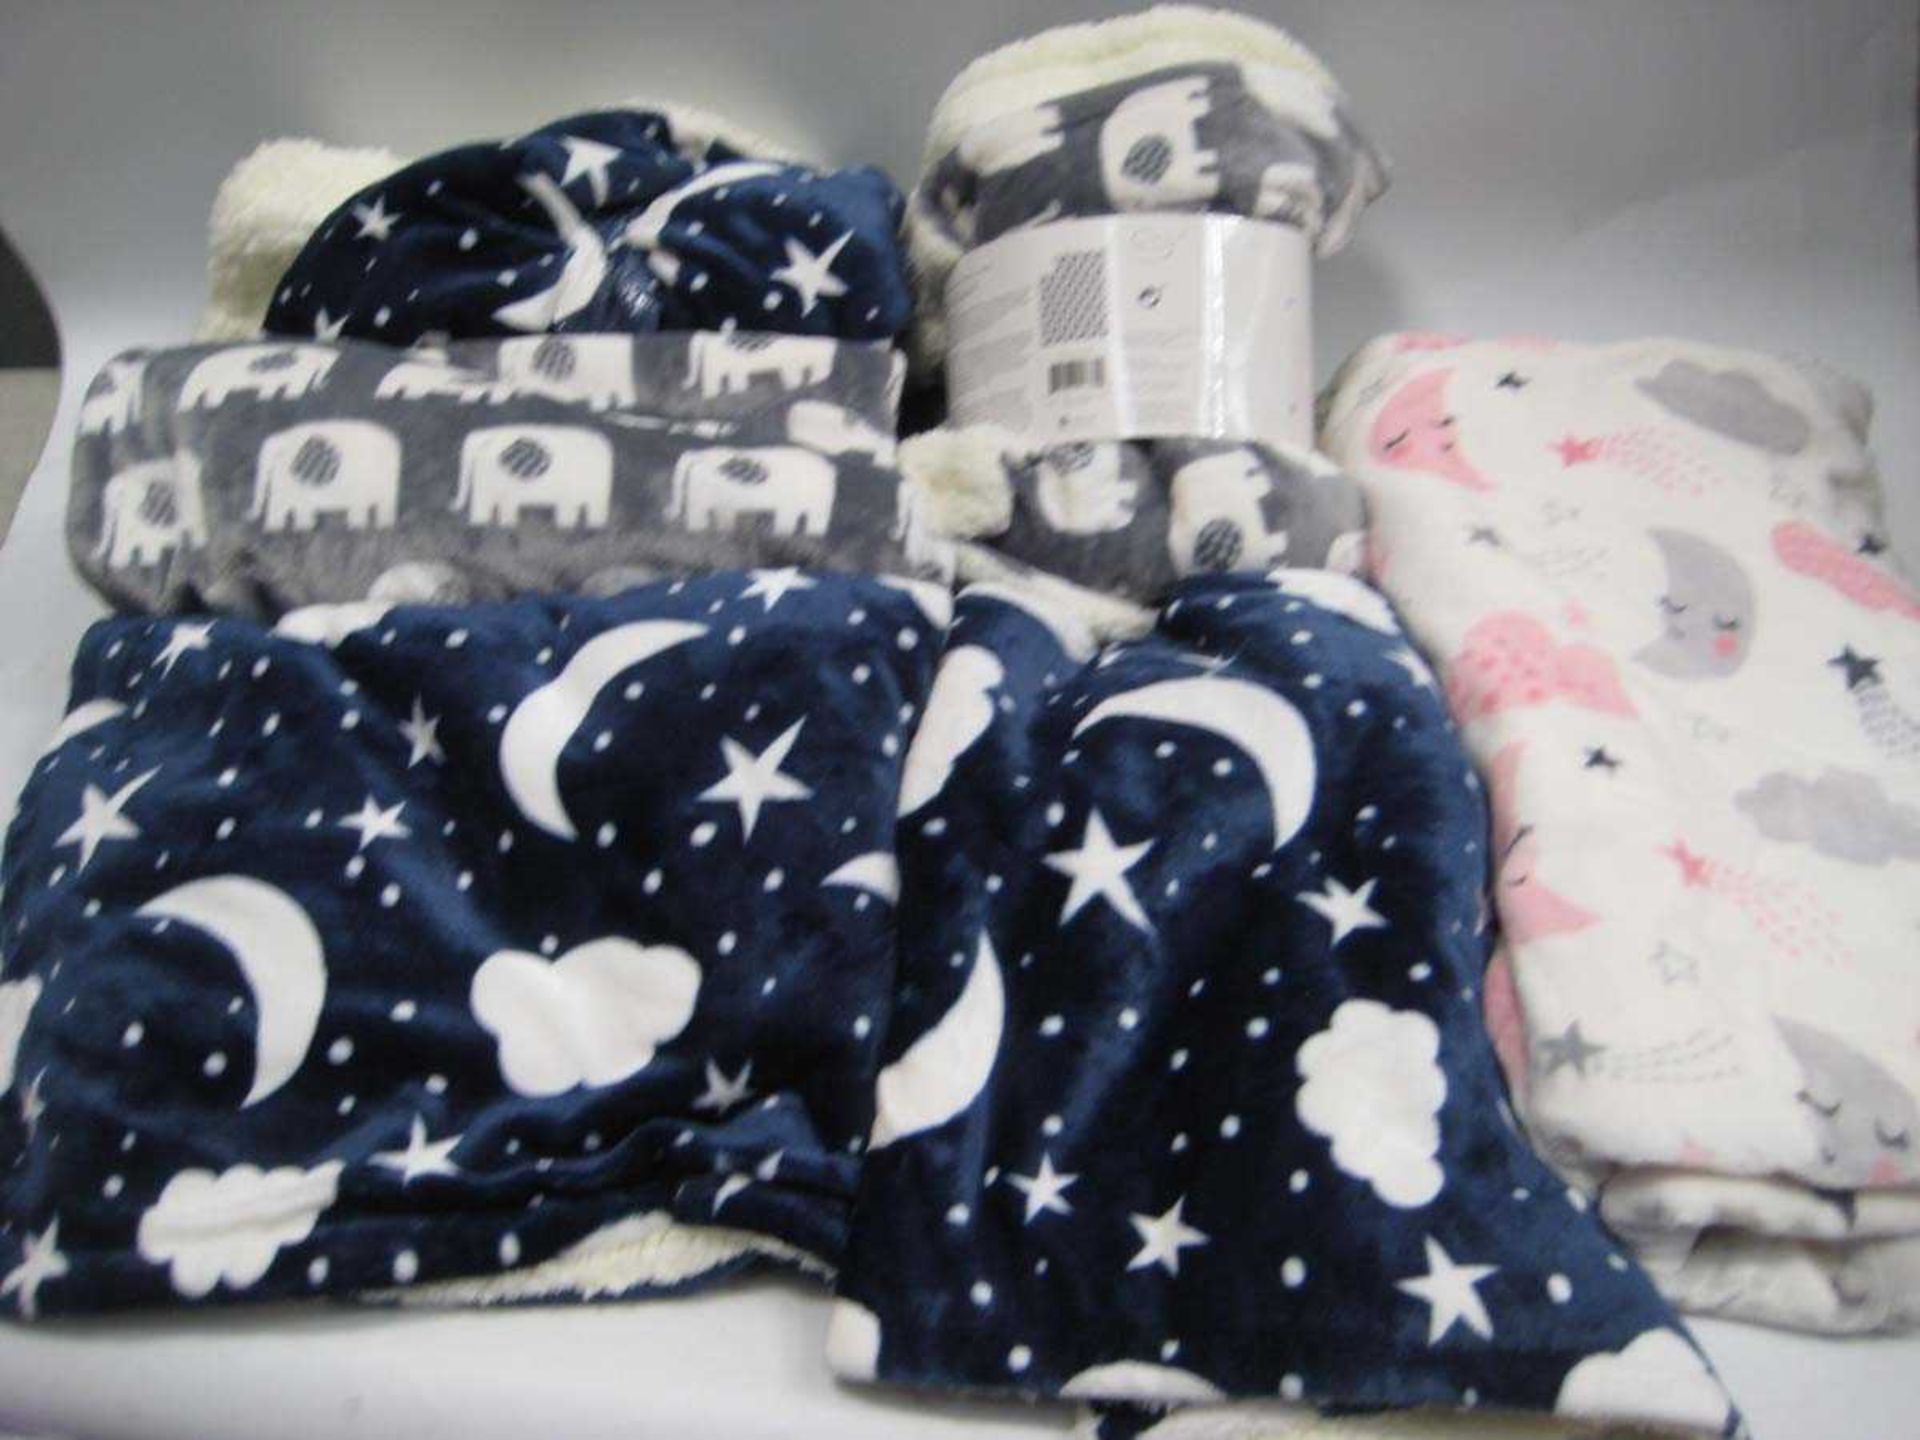 +VAT A bag containing 6x Babies Blankets in various styles.